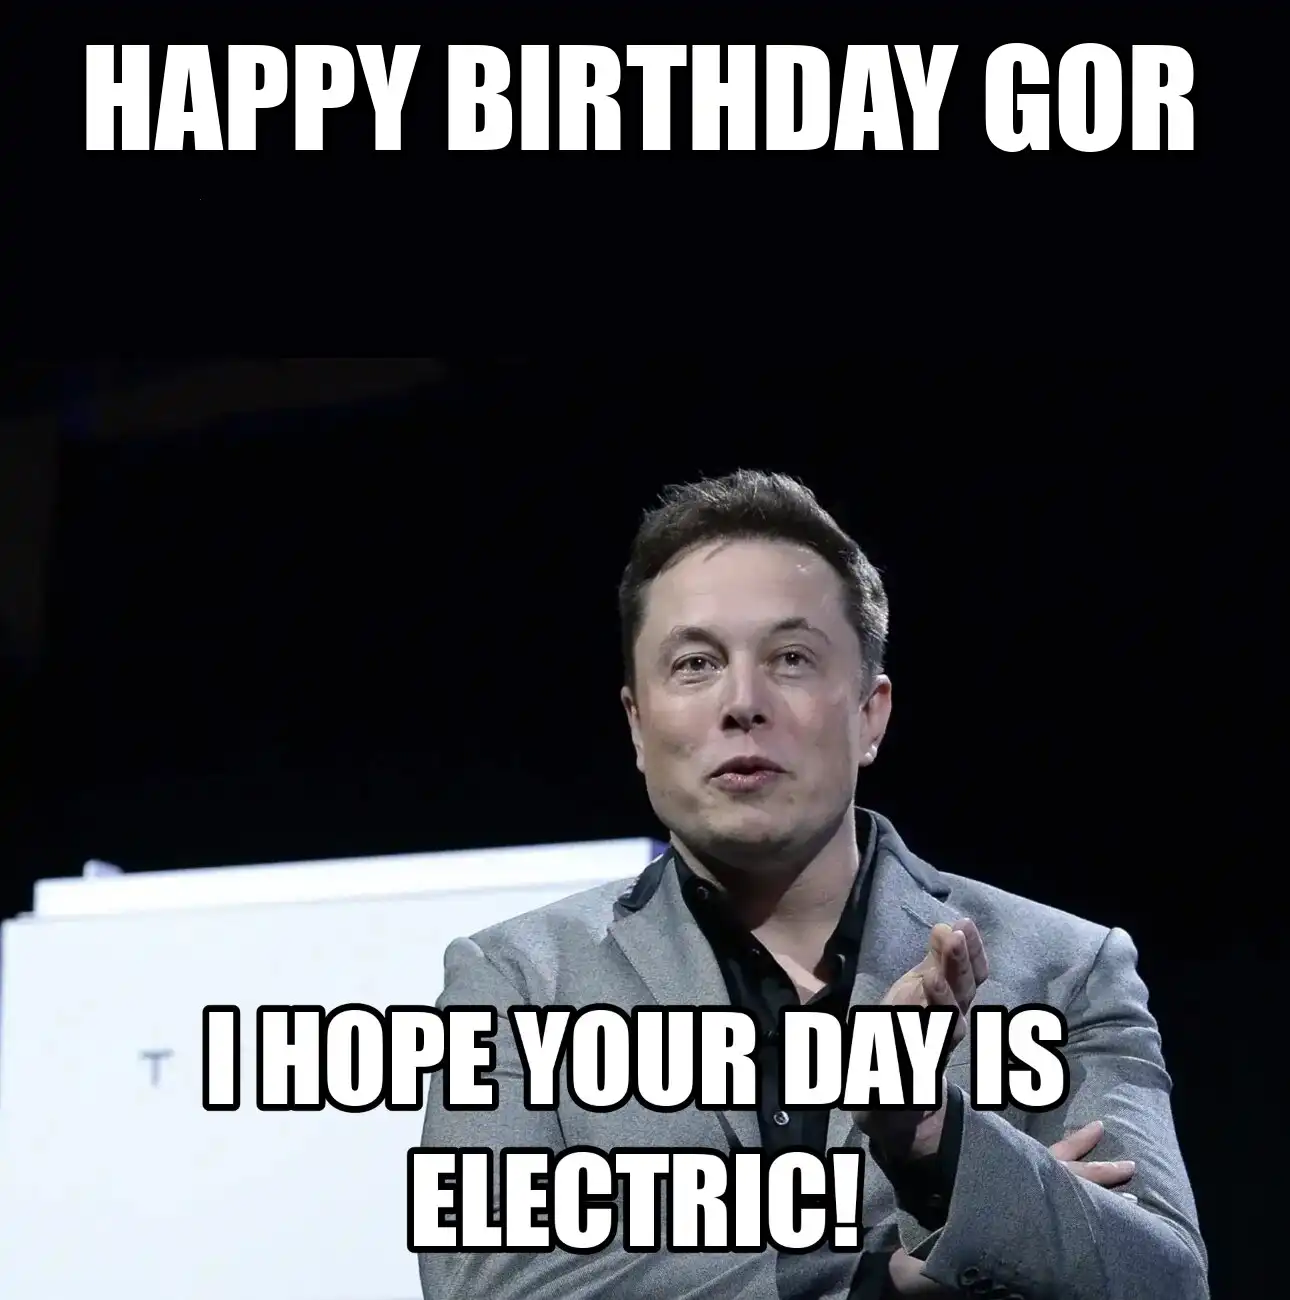 Happy Birthday Gor I Hope Your Day Is Electric Meme